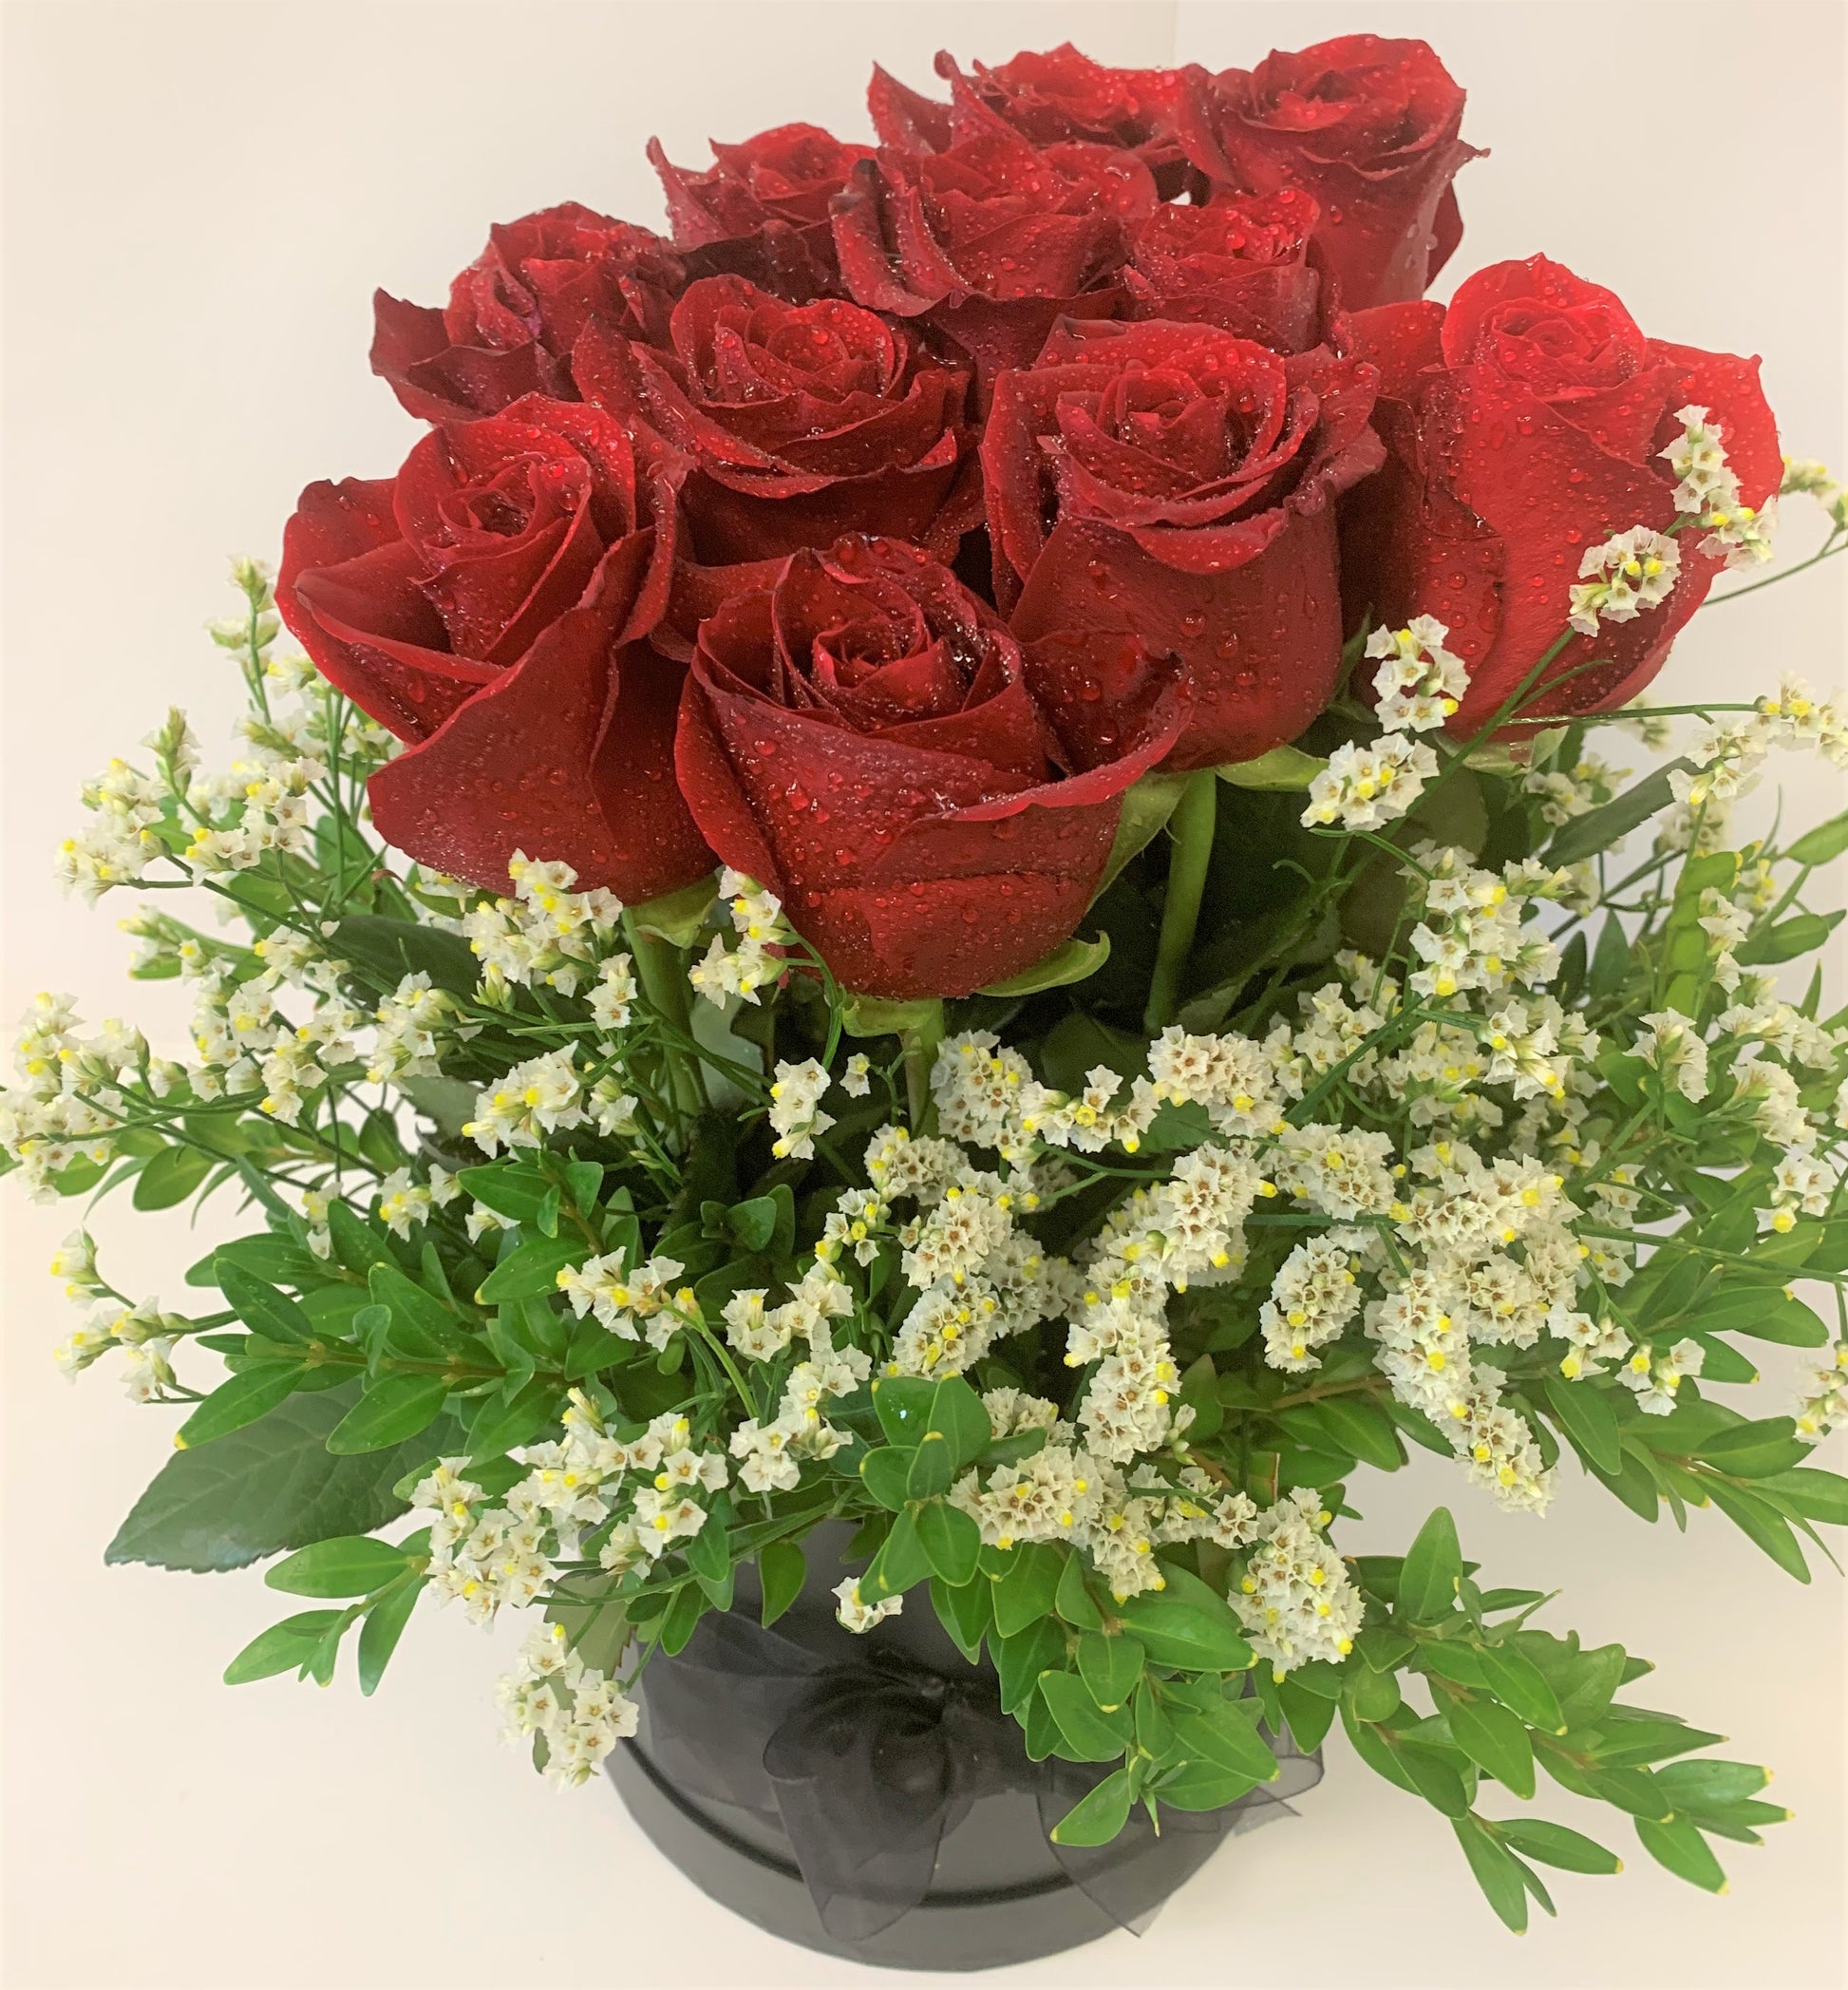 12 Beautiful red roses in water in a decorative box for your special friend or lover for Valentines day. 